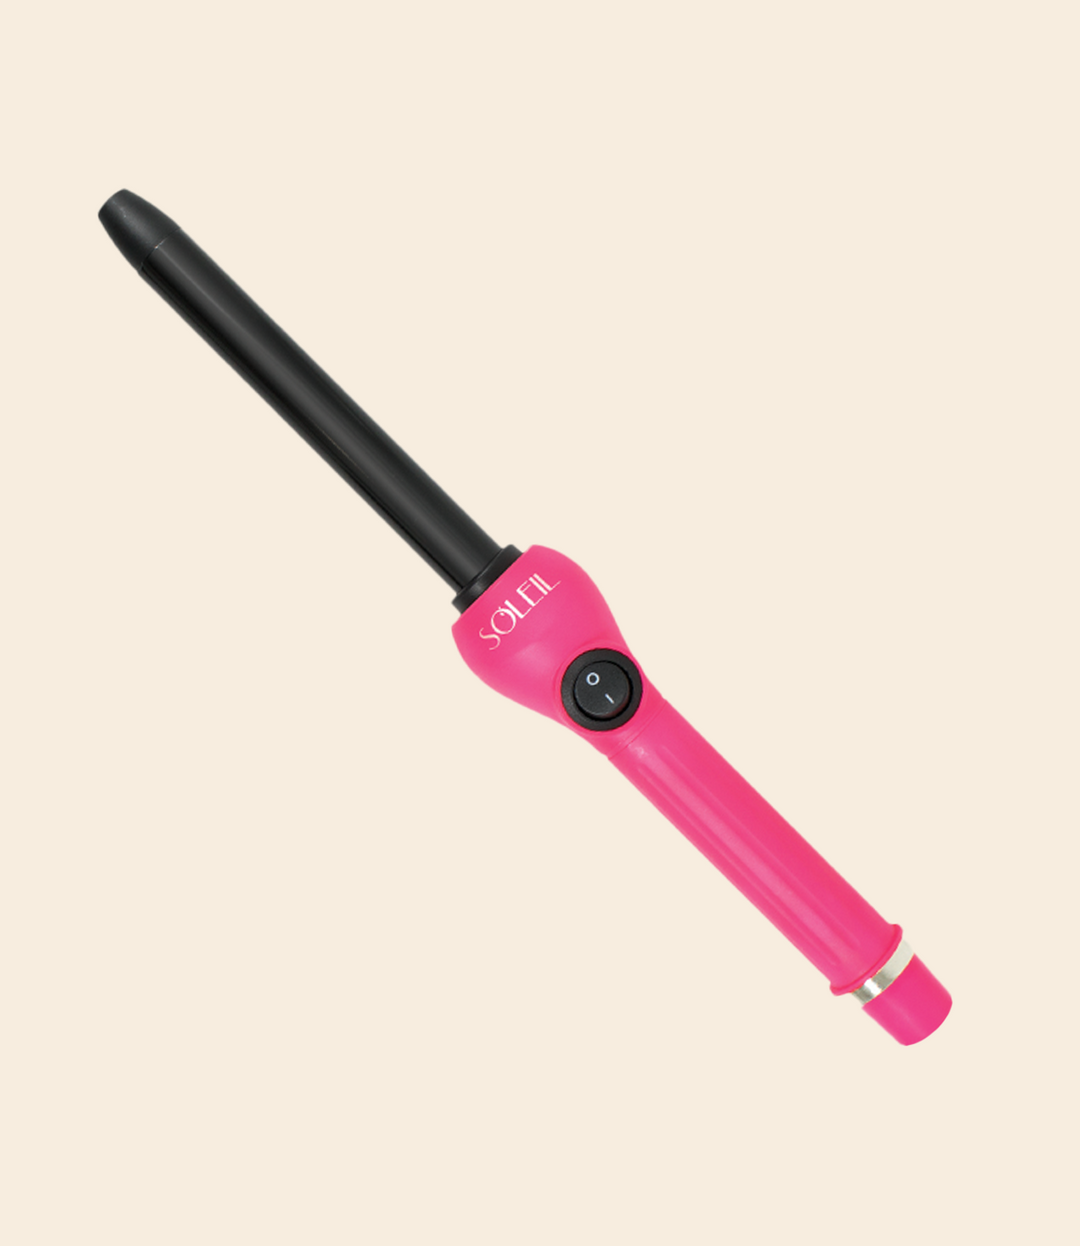 Curling Iron 19mm